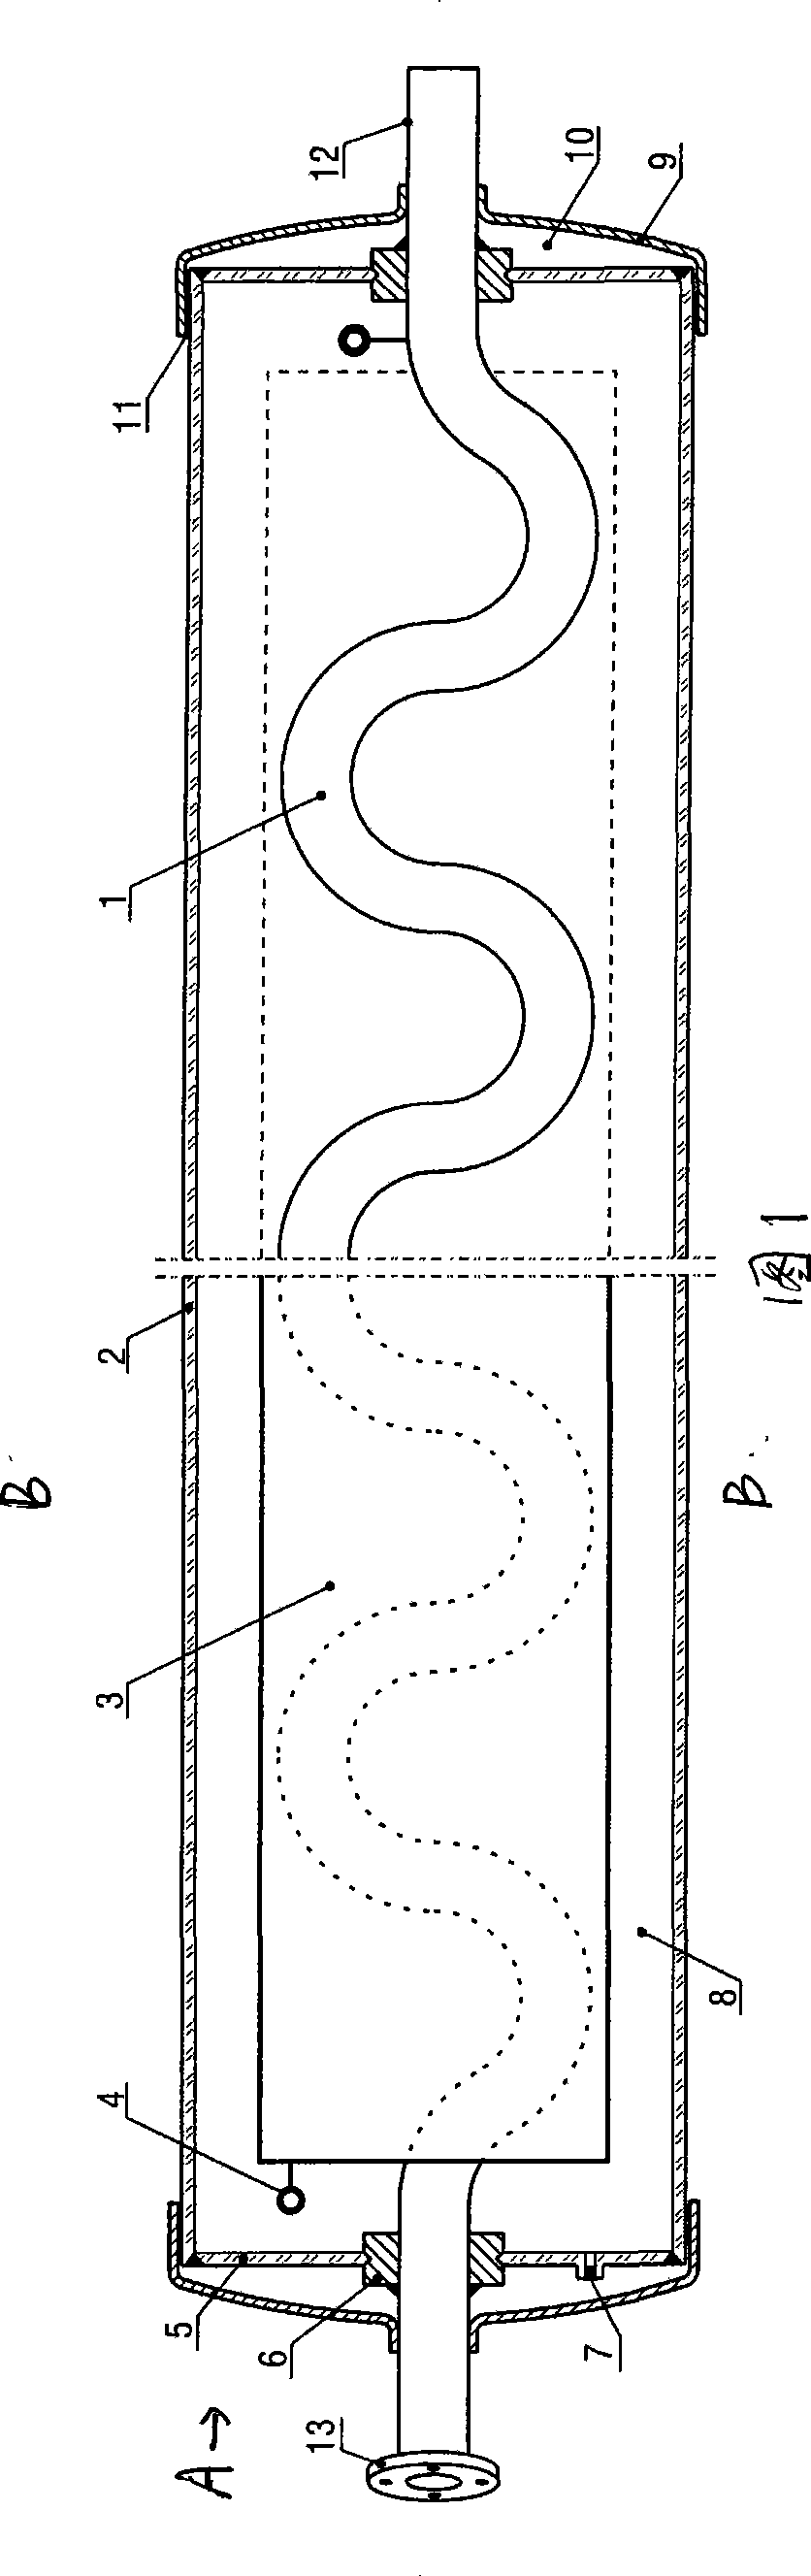 S-shaped through type solar thermal-collecting tube